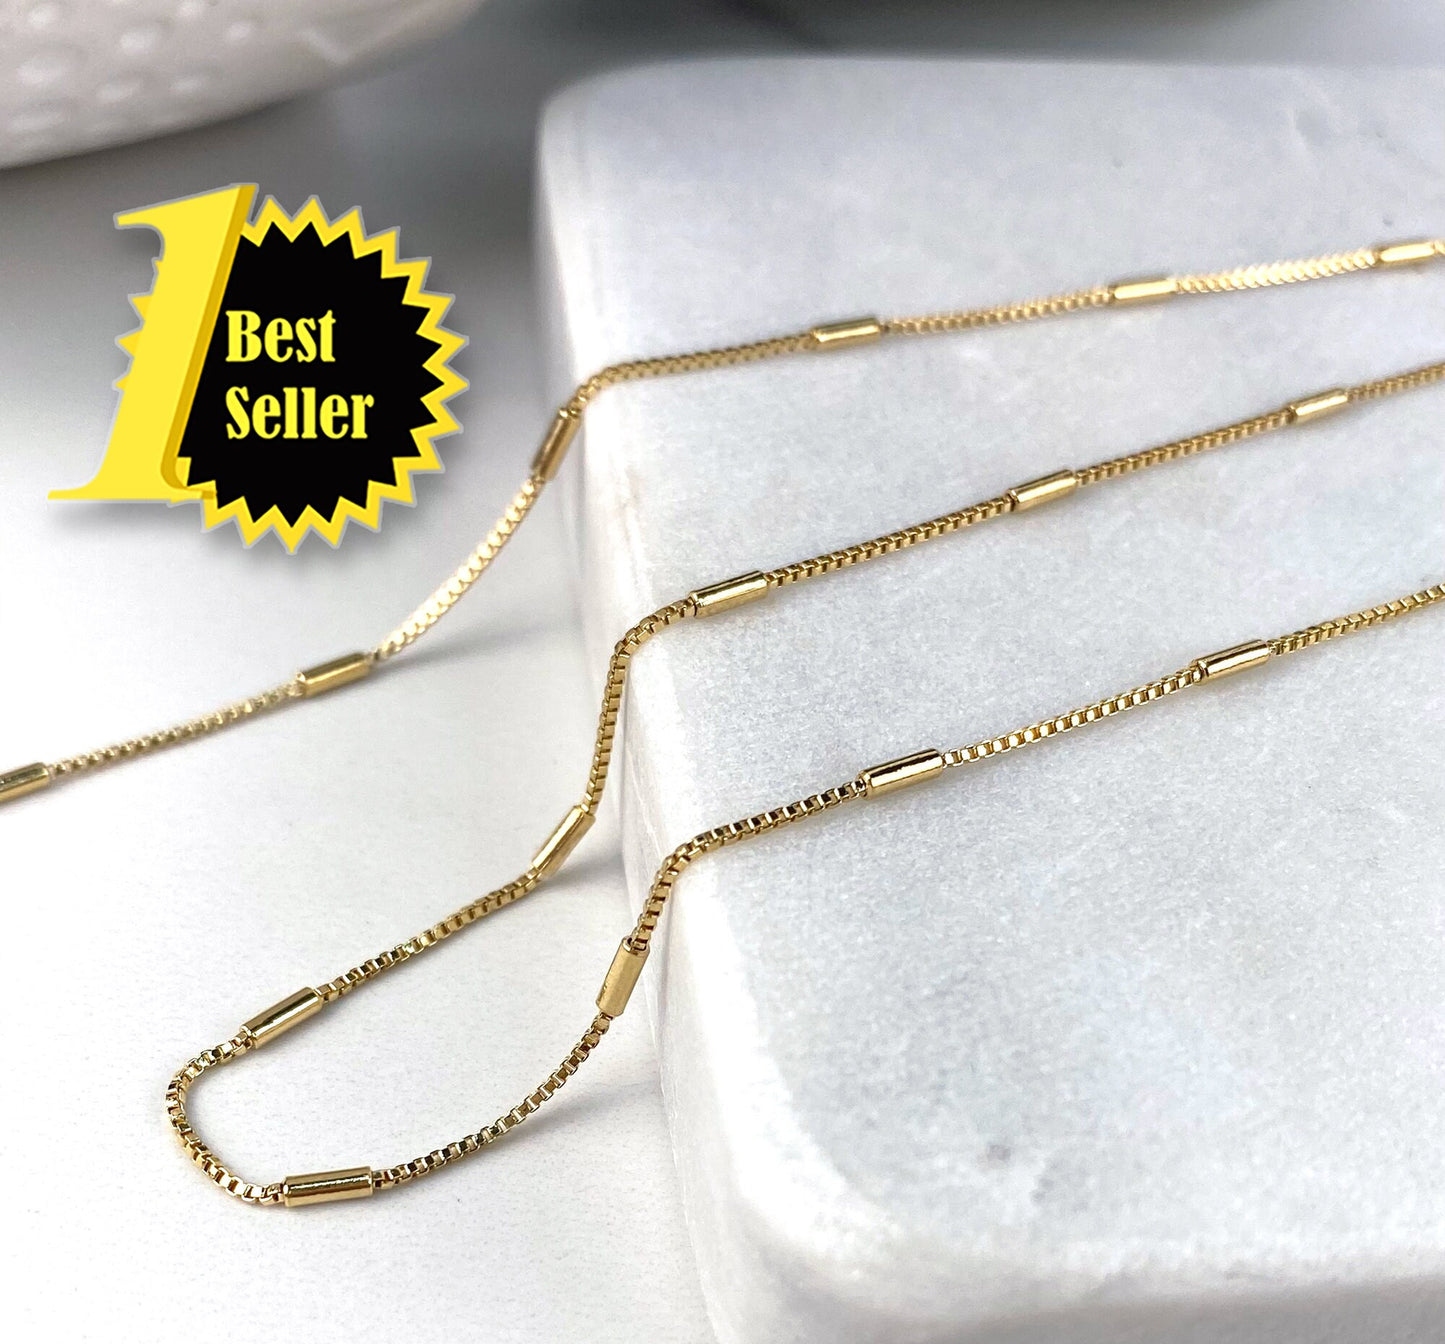 18k Gold Filled Fancy Bar Box Chain 1mm Thickness Link Necklace 18 inches Length, Wholesale Jewelry Making Supplies